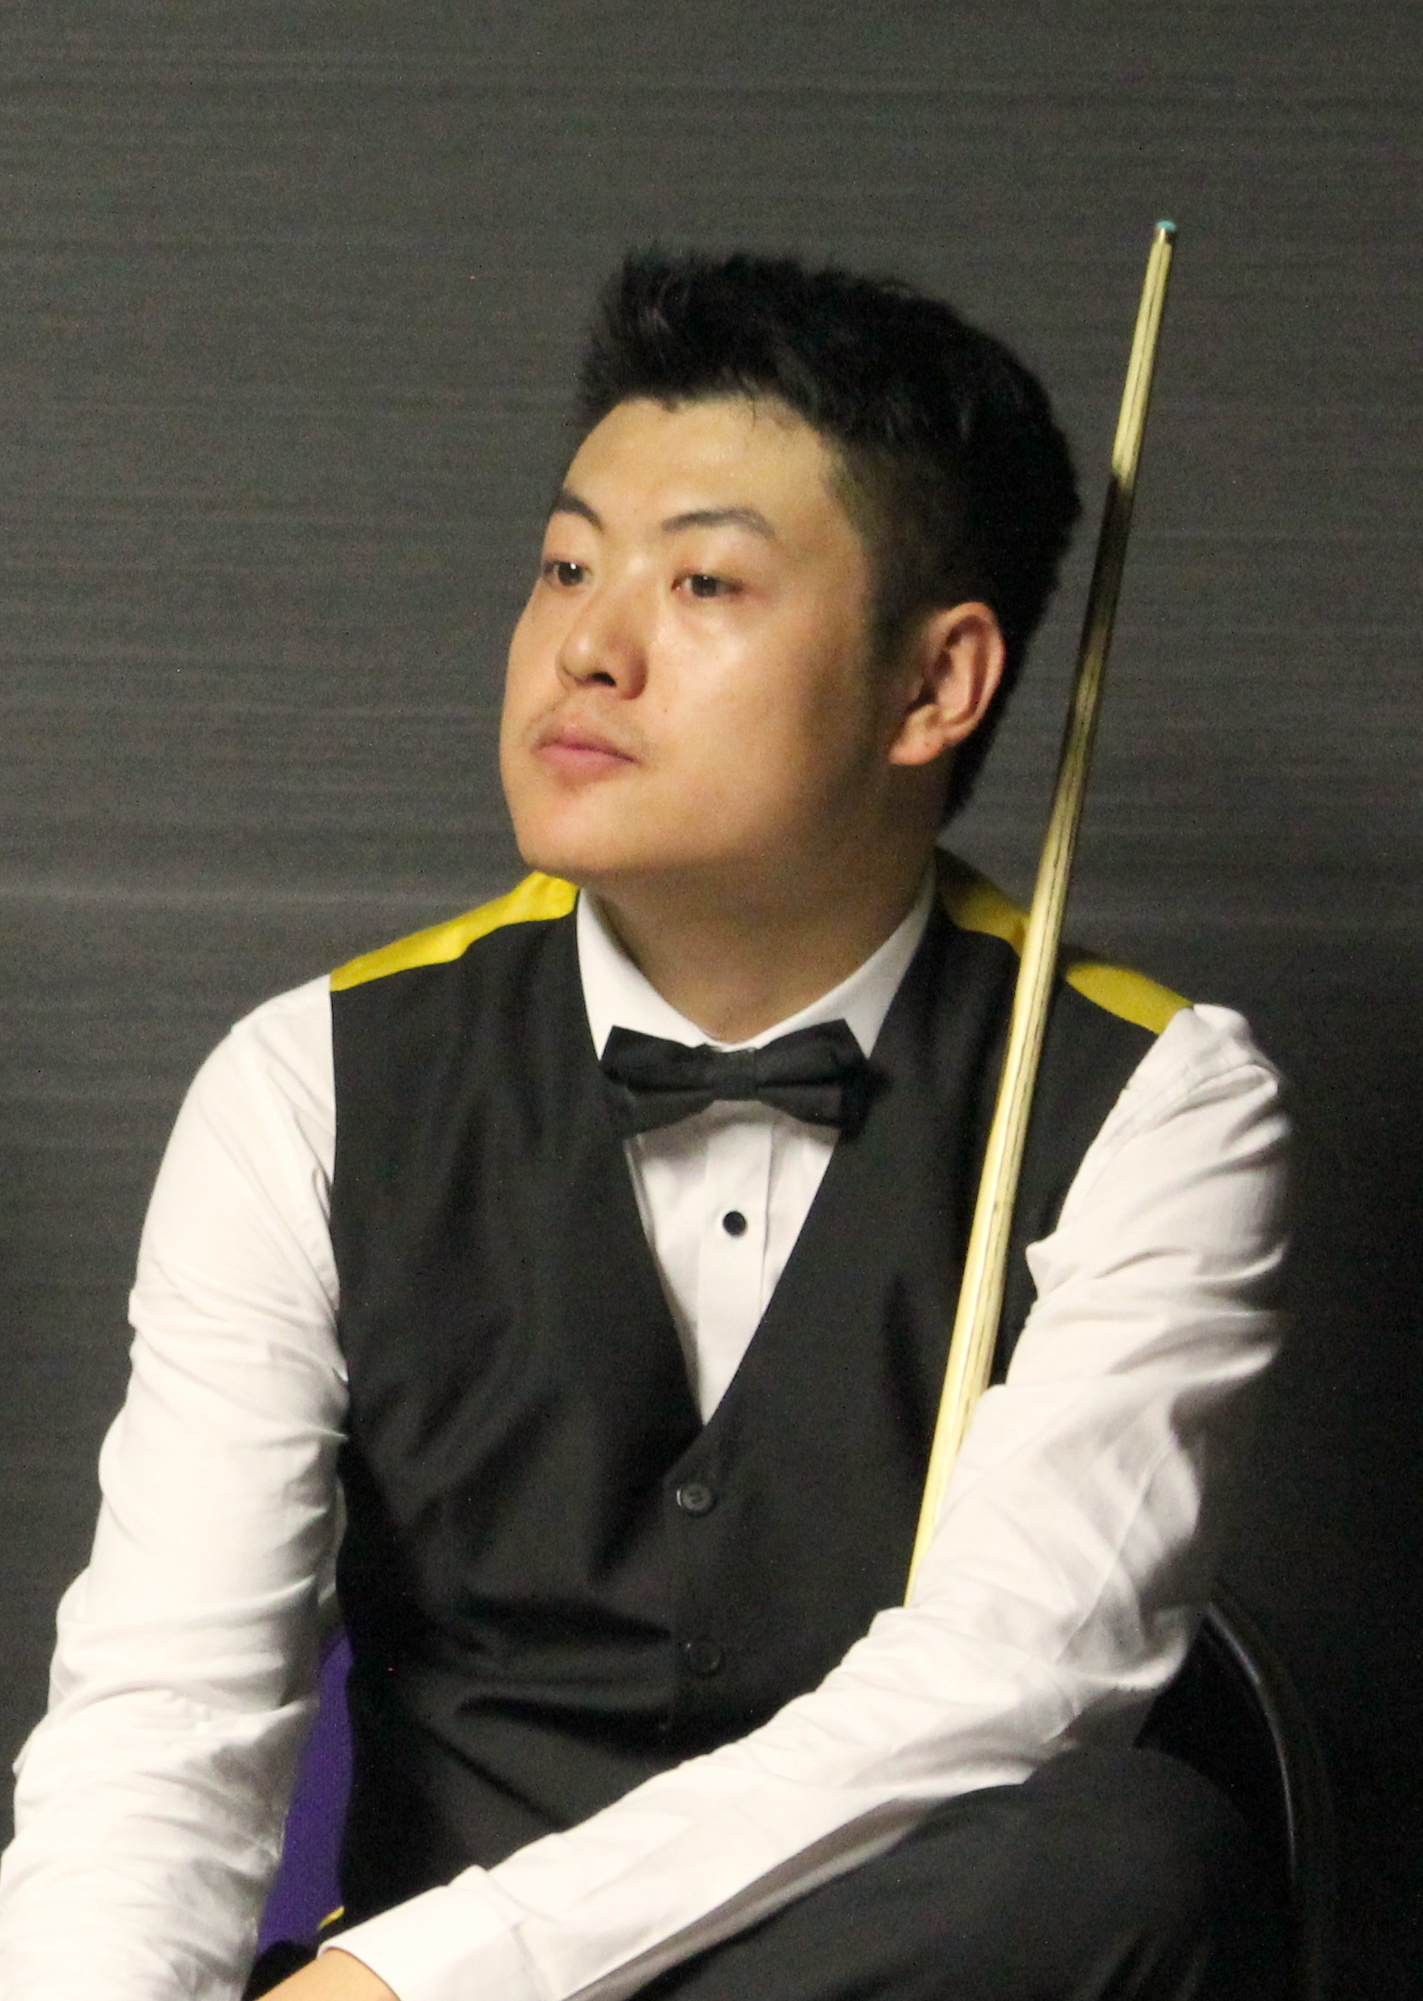 List of snooker players investigated for match-fixing